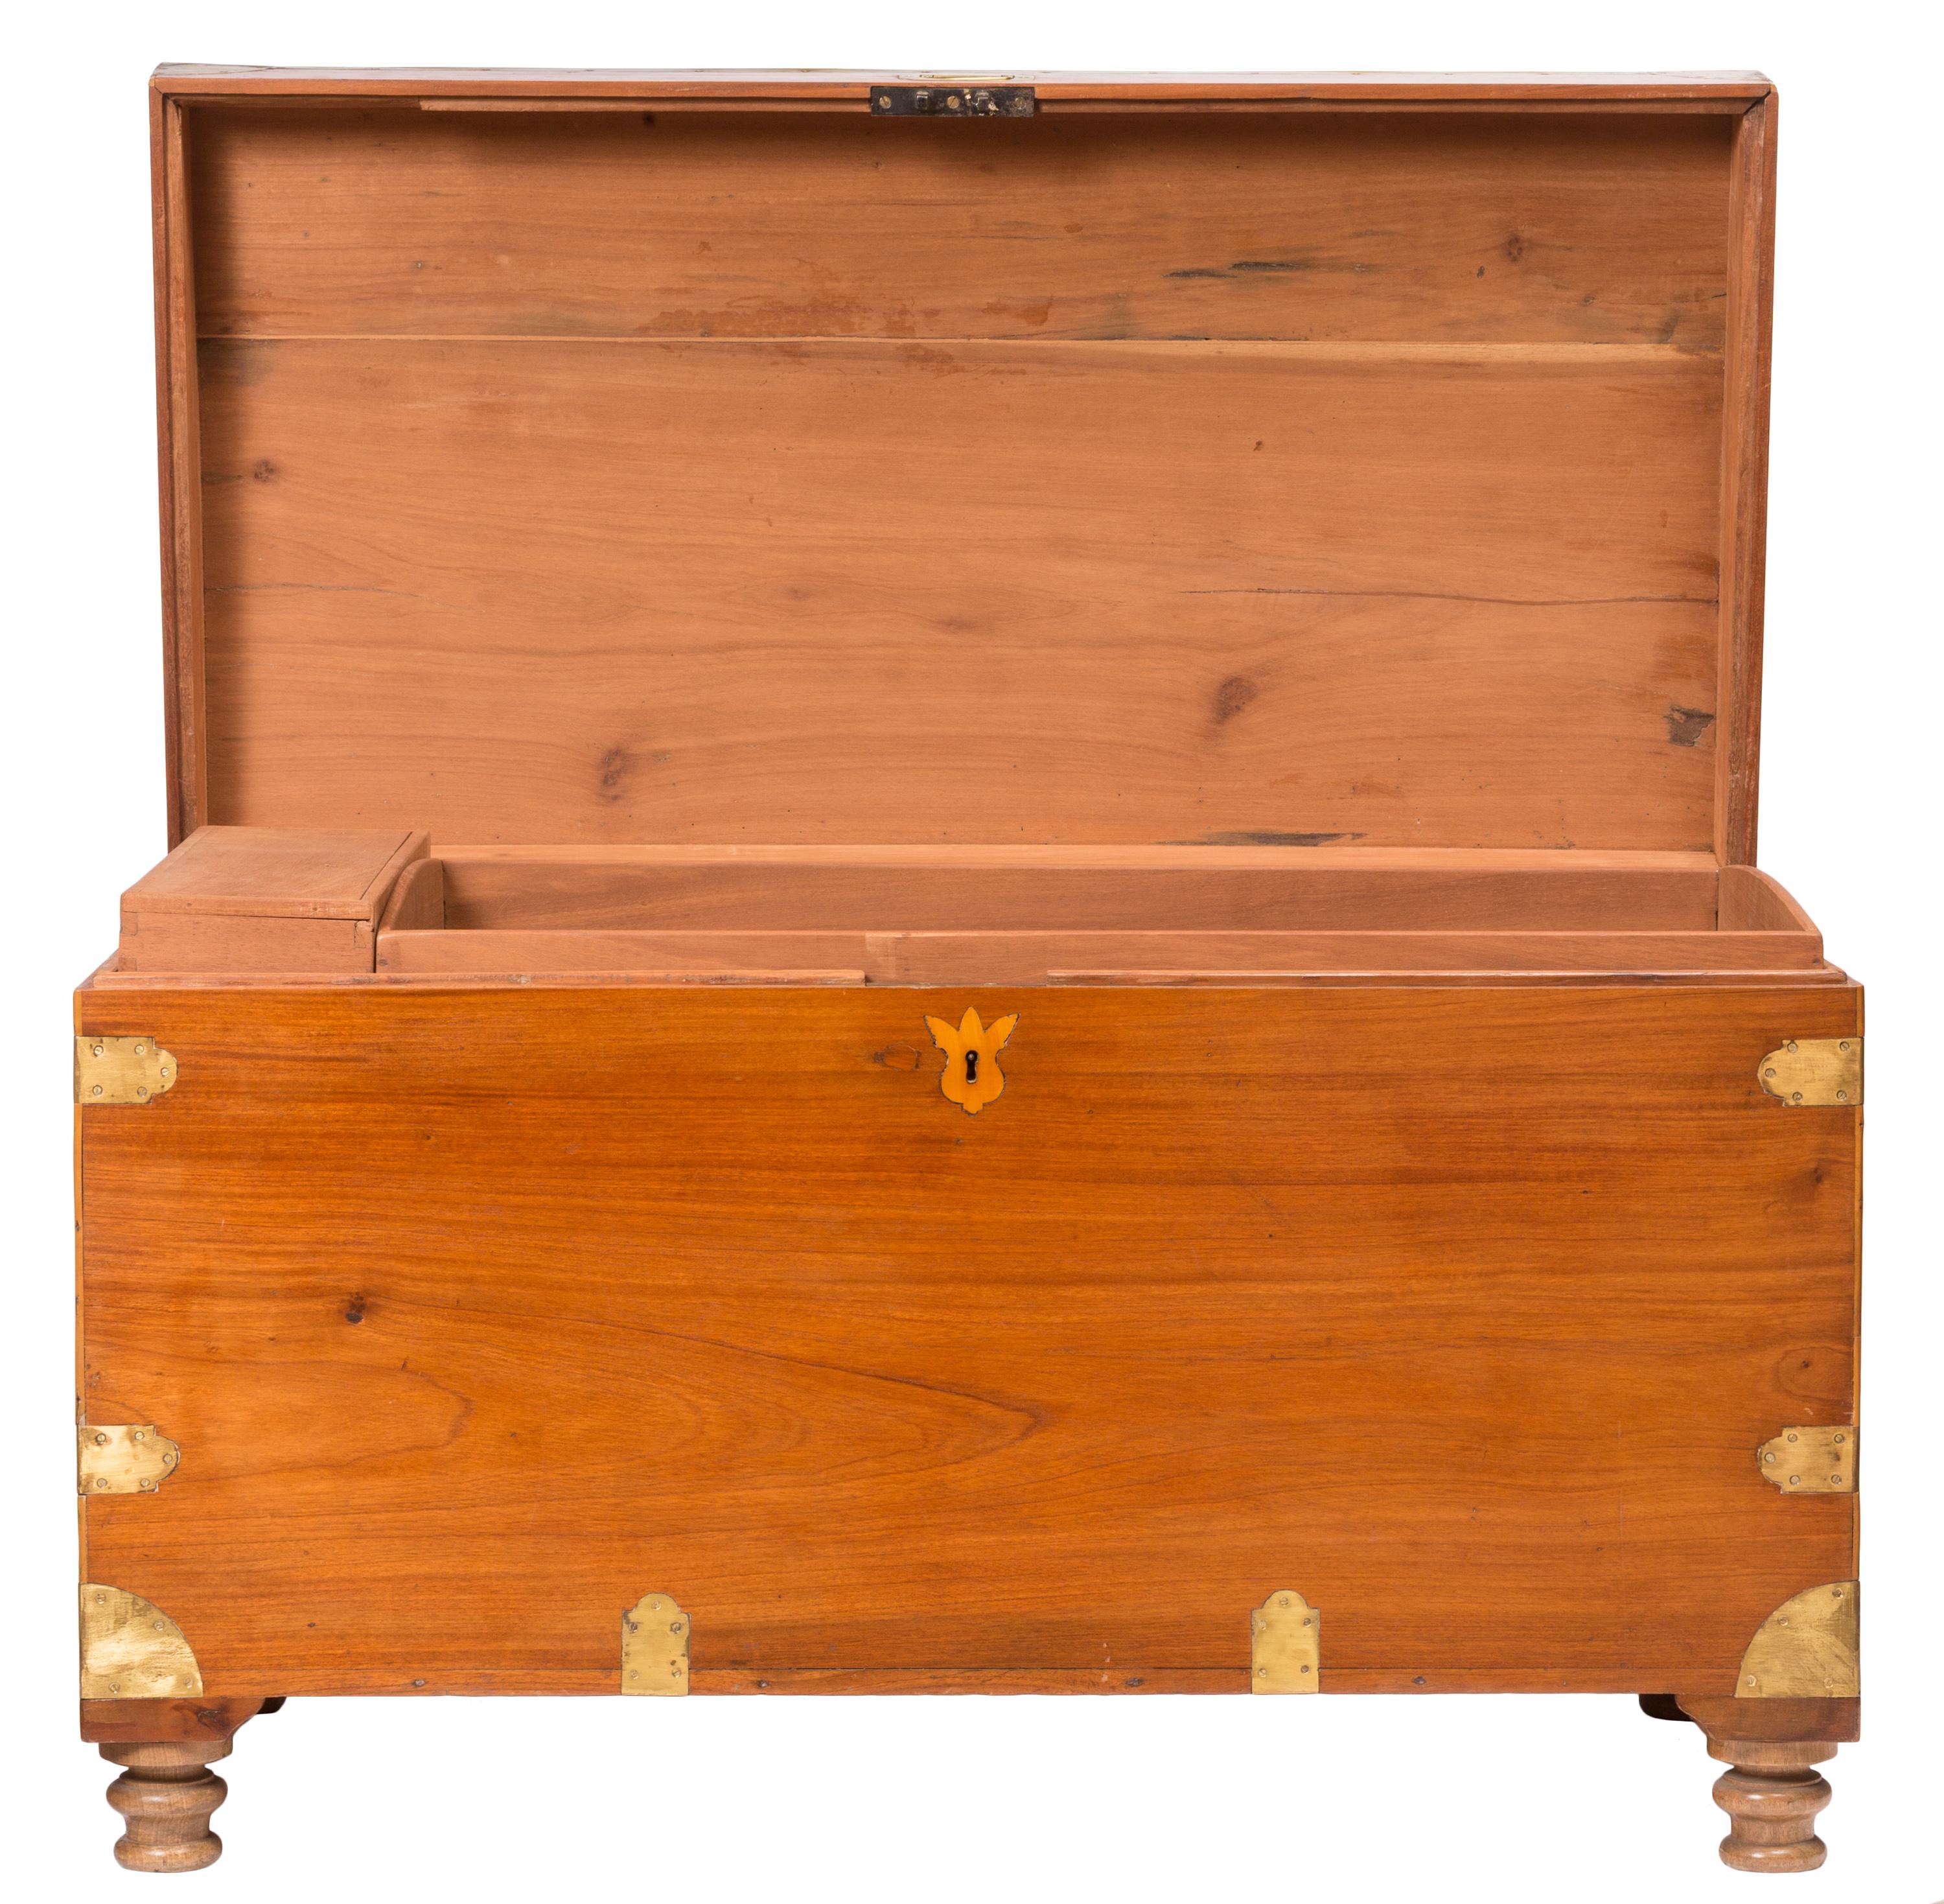 Early 20th century camphor wood British military campaign style chest, with original brass hardware and 